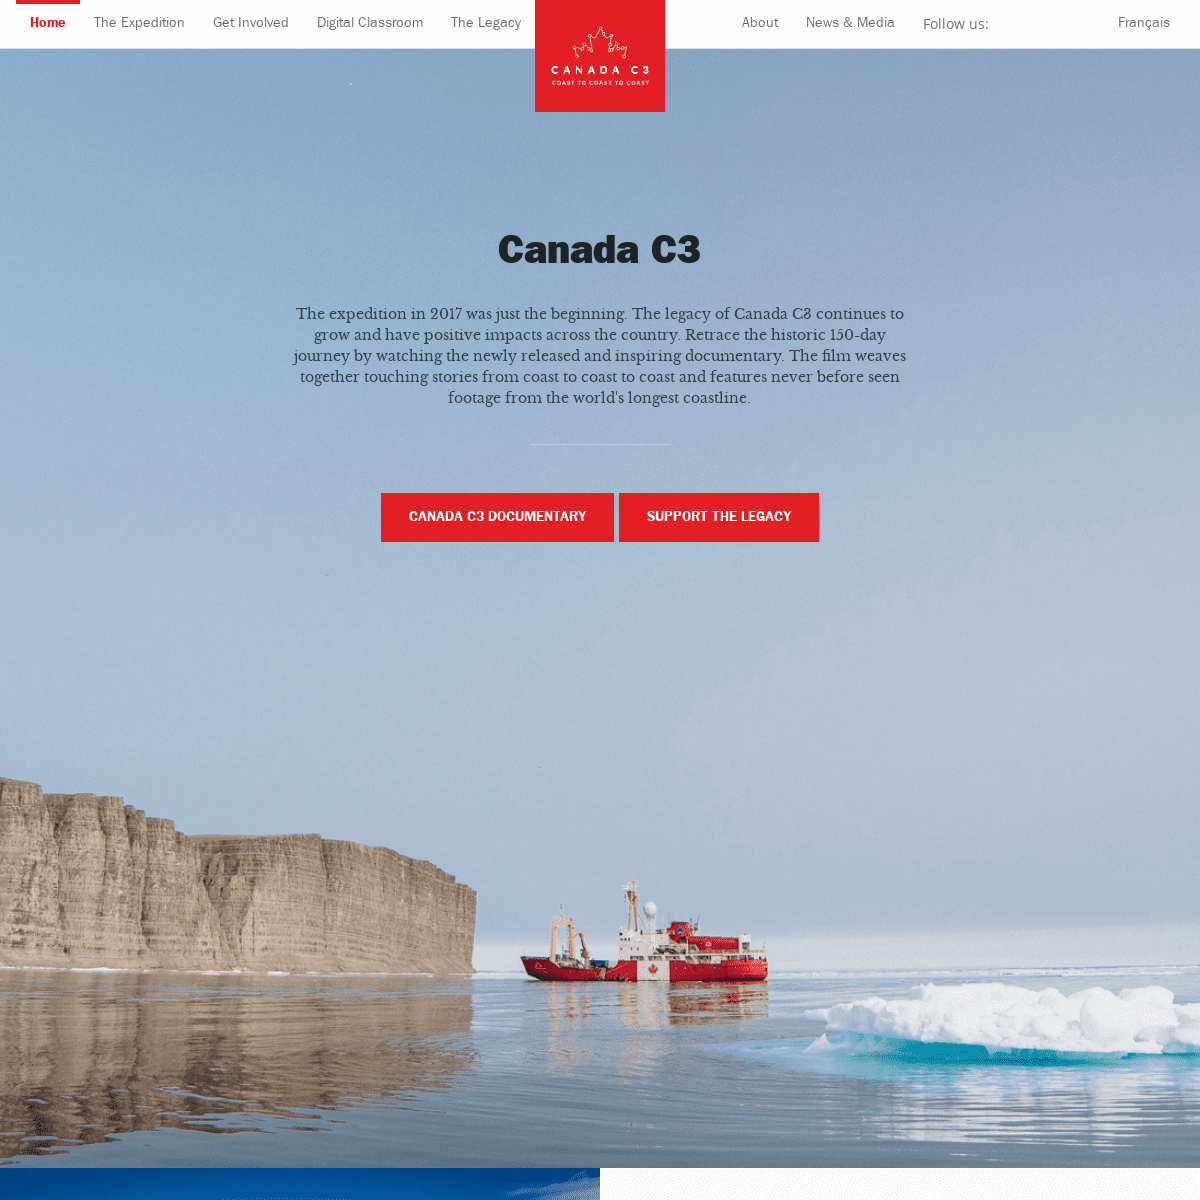 A complete backup of canadac3.ca